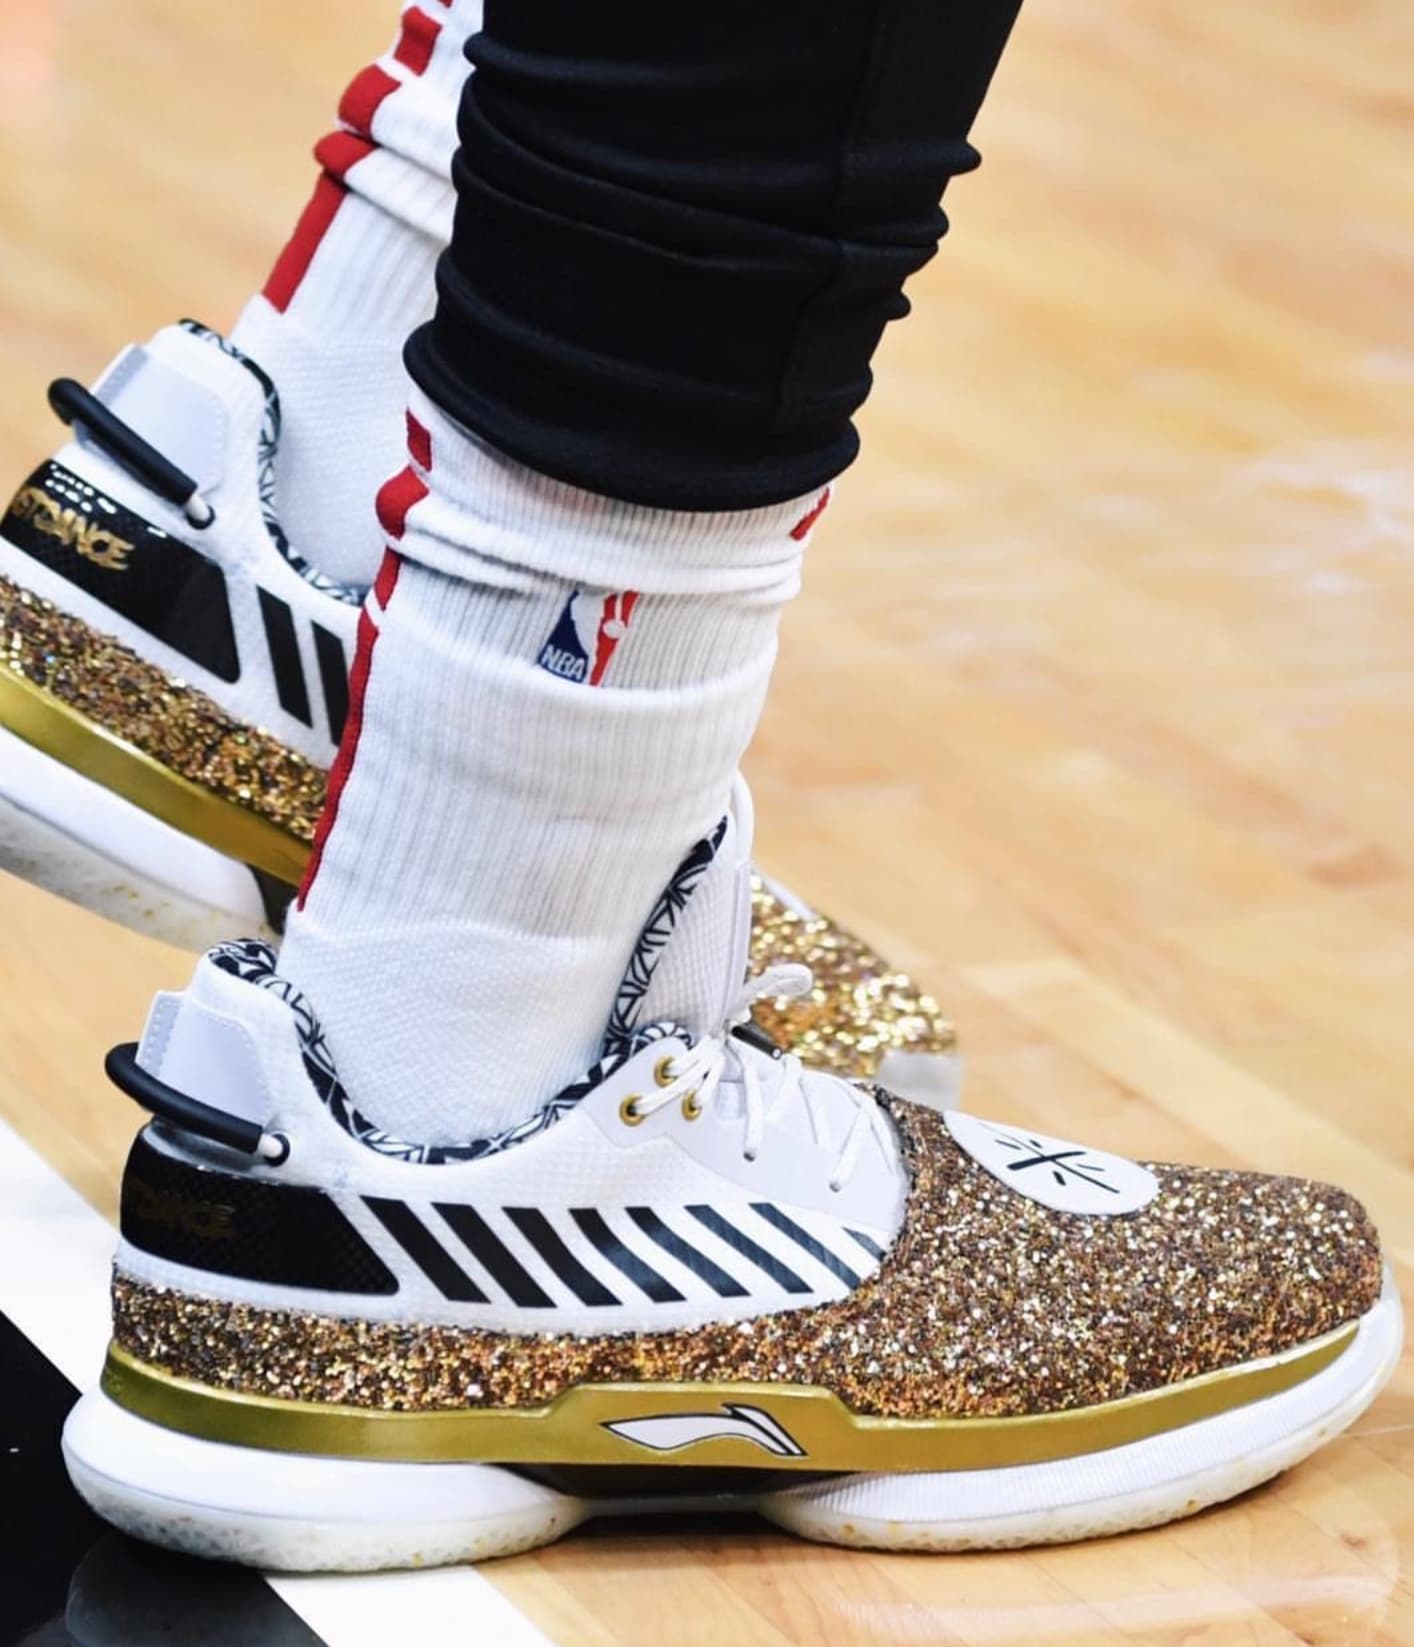 Miami Heat's Dwyane Wade Wears Shoes That Say One Last, 53% OFF